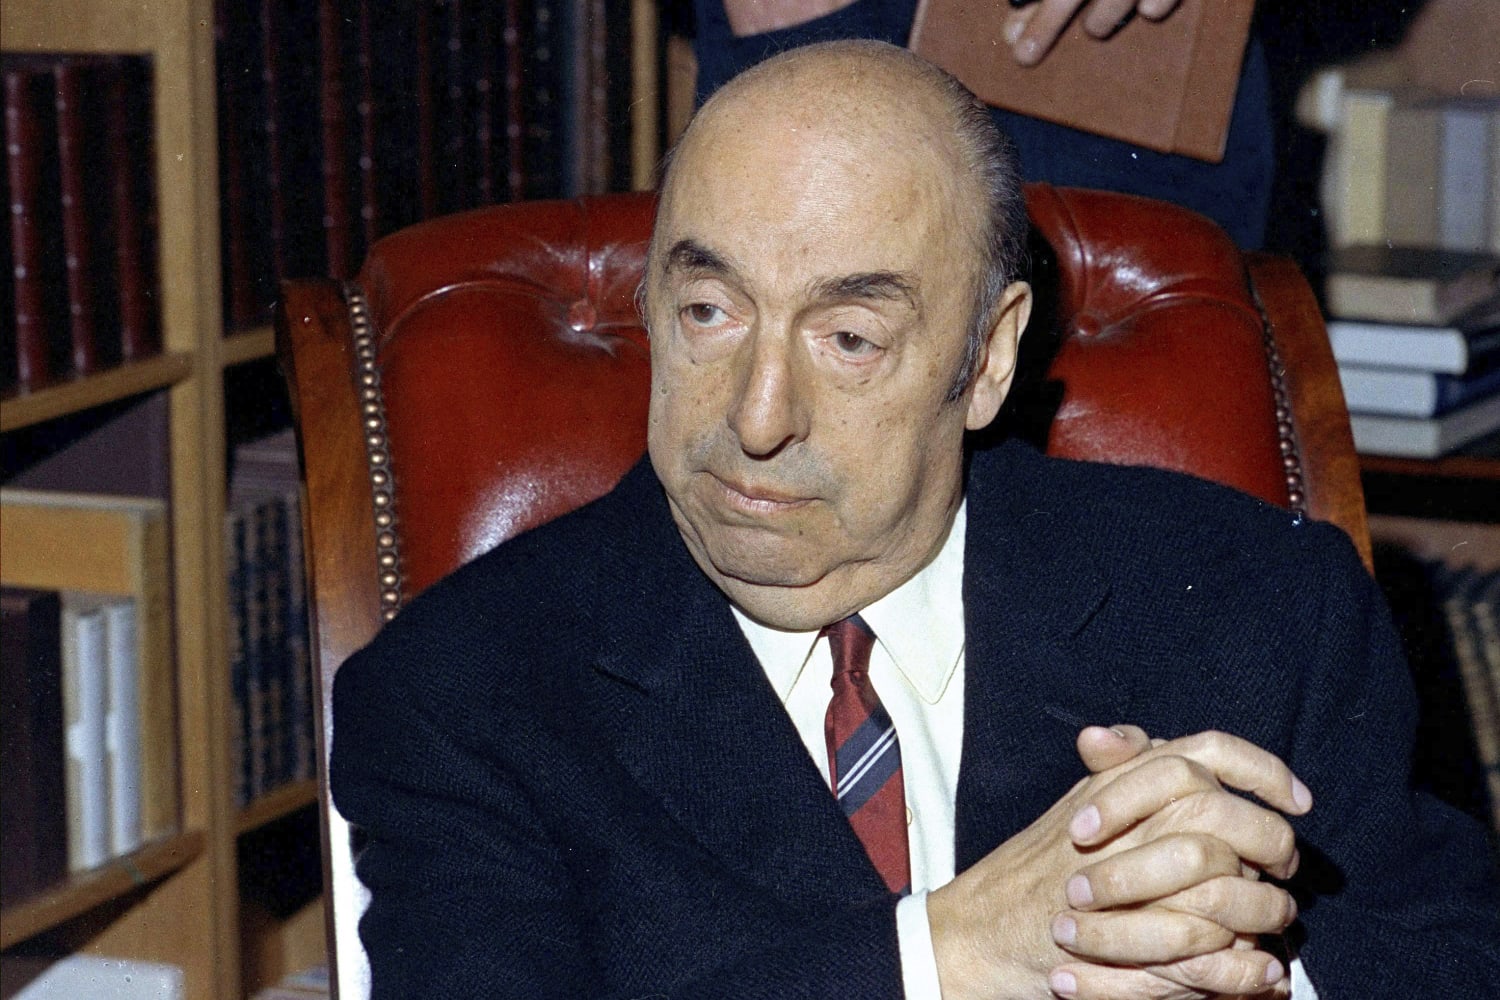 Legendary Chilean poet Pablo Neruda was poisoned, forensic experts say